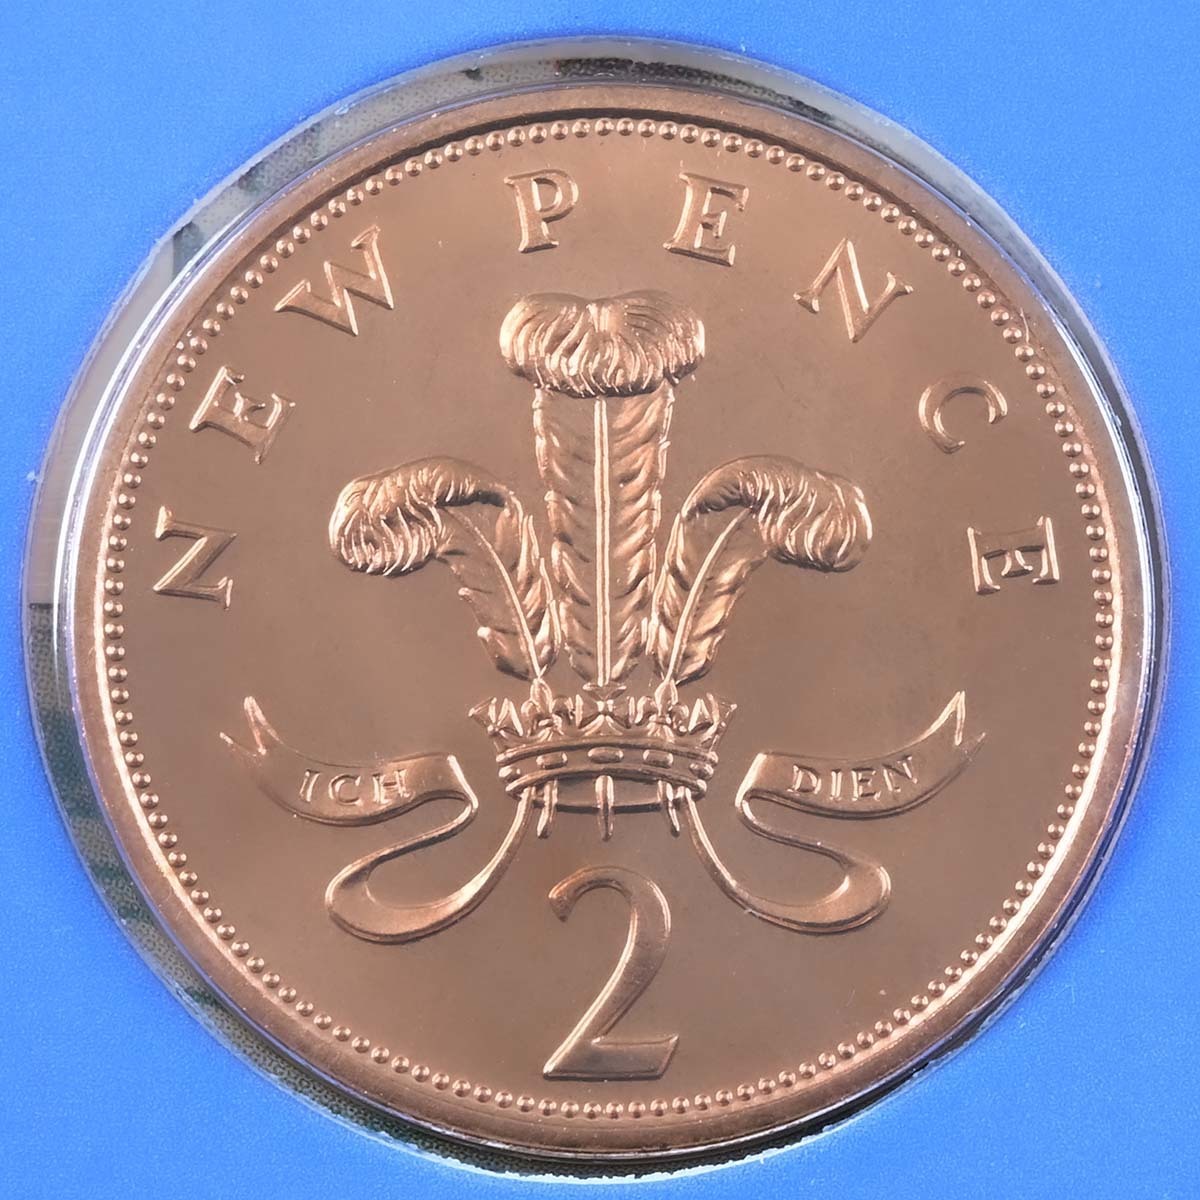 Close up of Two Pence piece in 1983 UK Martini Great British Coin Collection Set Uncirculated : Rare New Pence 2p.